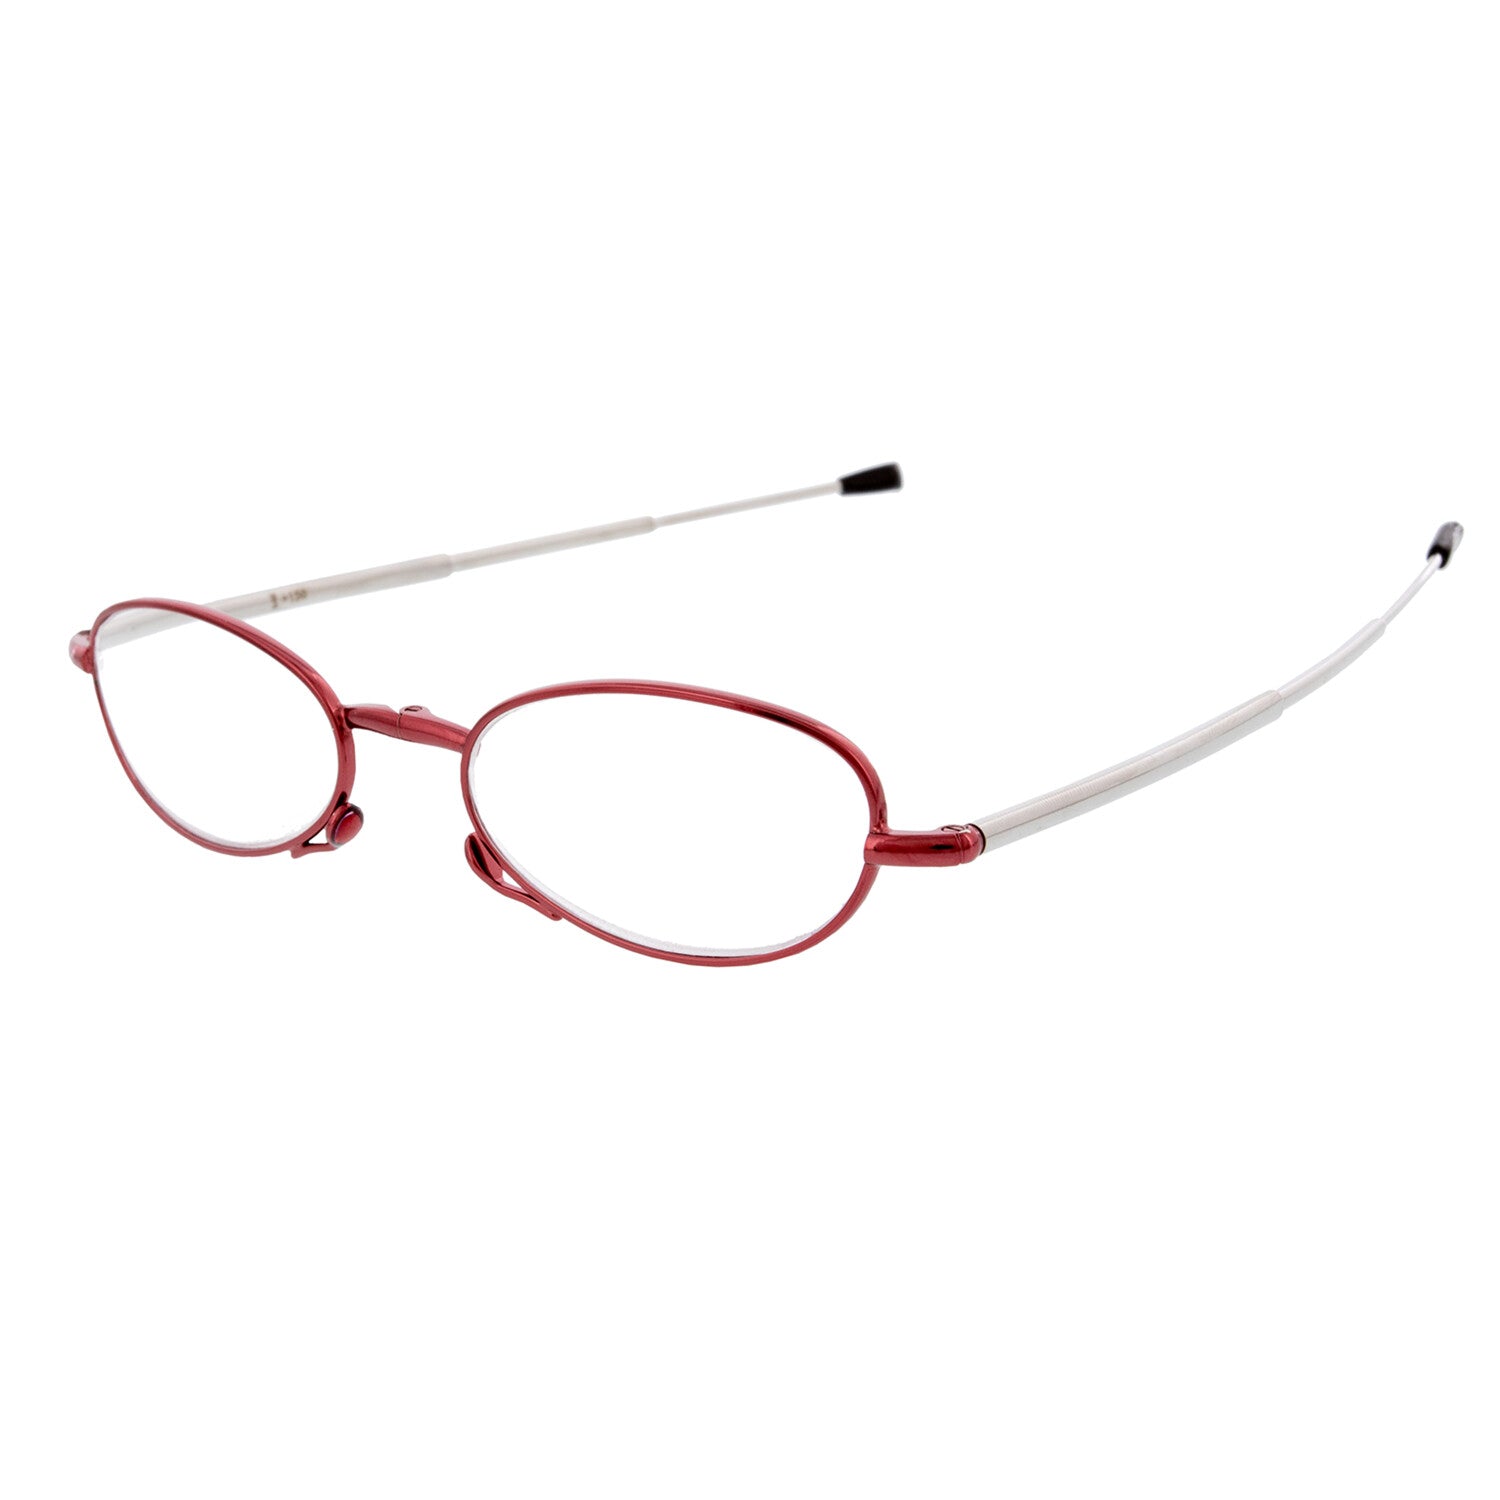 Pierce | Reading Glasses with Jewelry | BuyNeckglasses